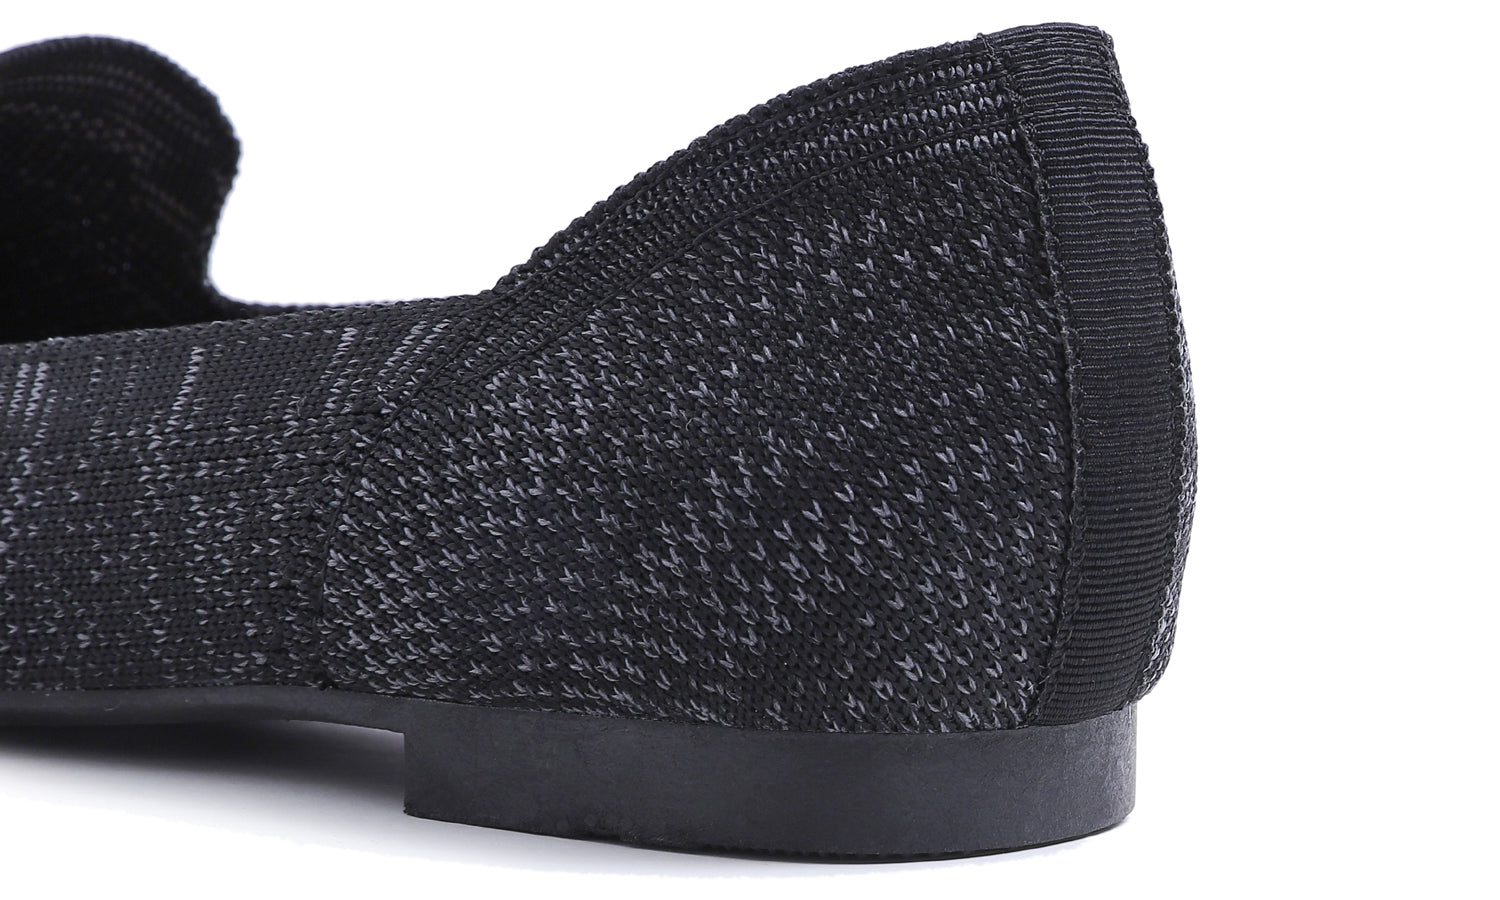 Feversole Women's Woven Fashion Breathable Knit Flat Shoes Black Mixed Loafer